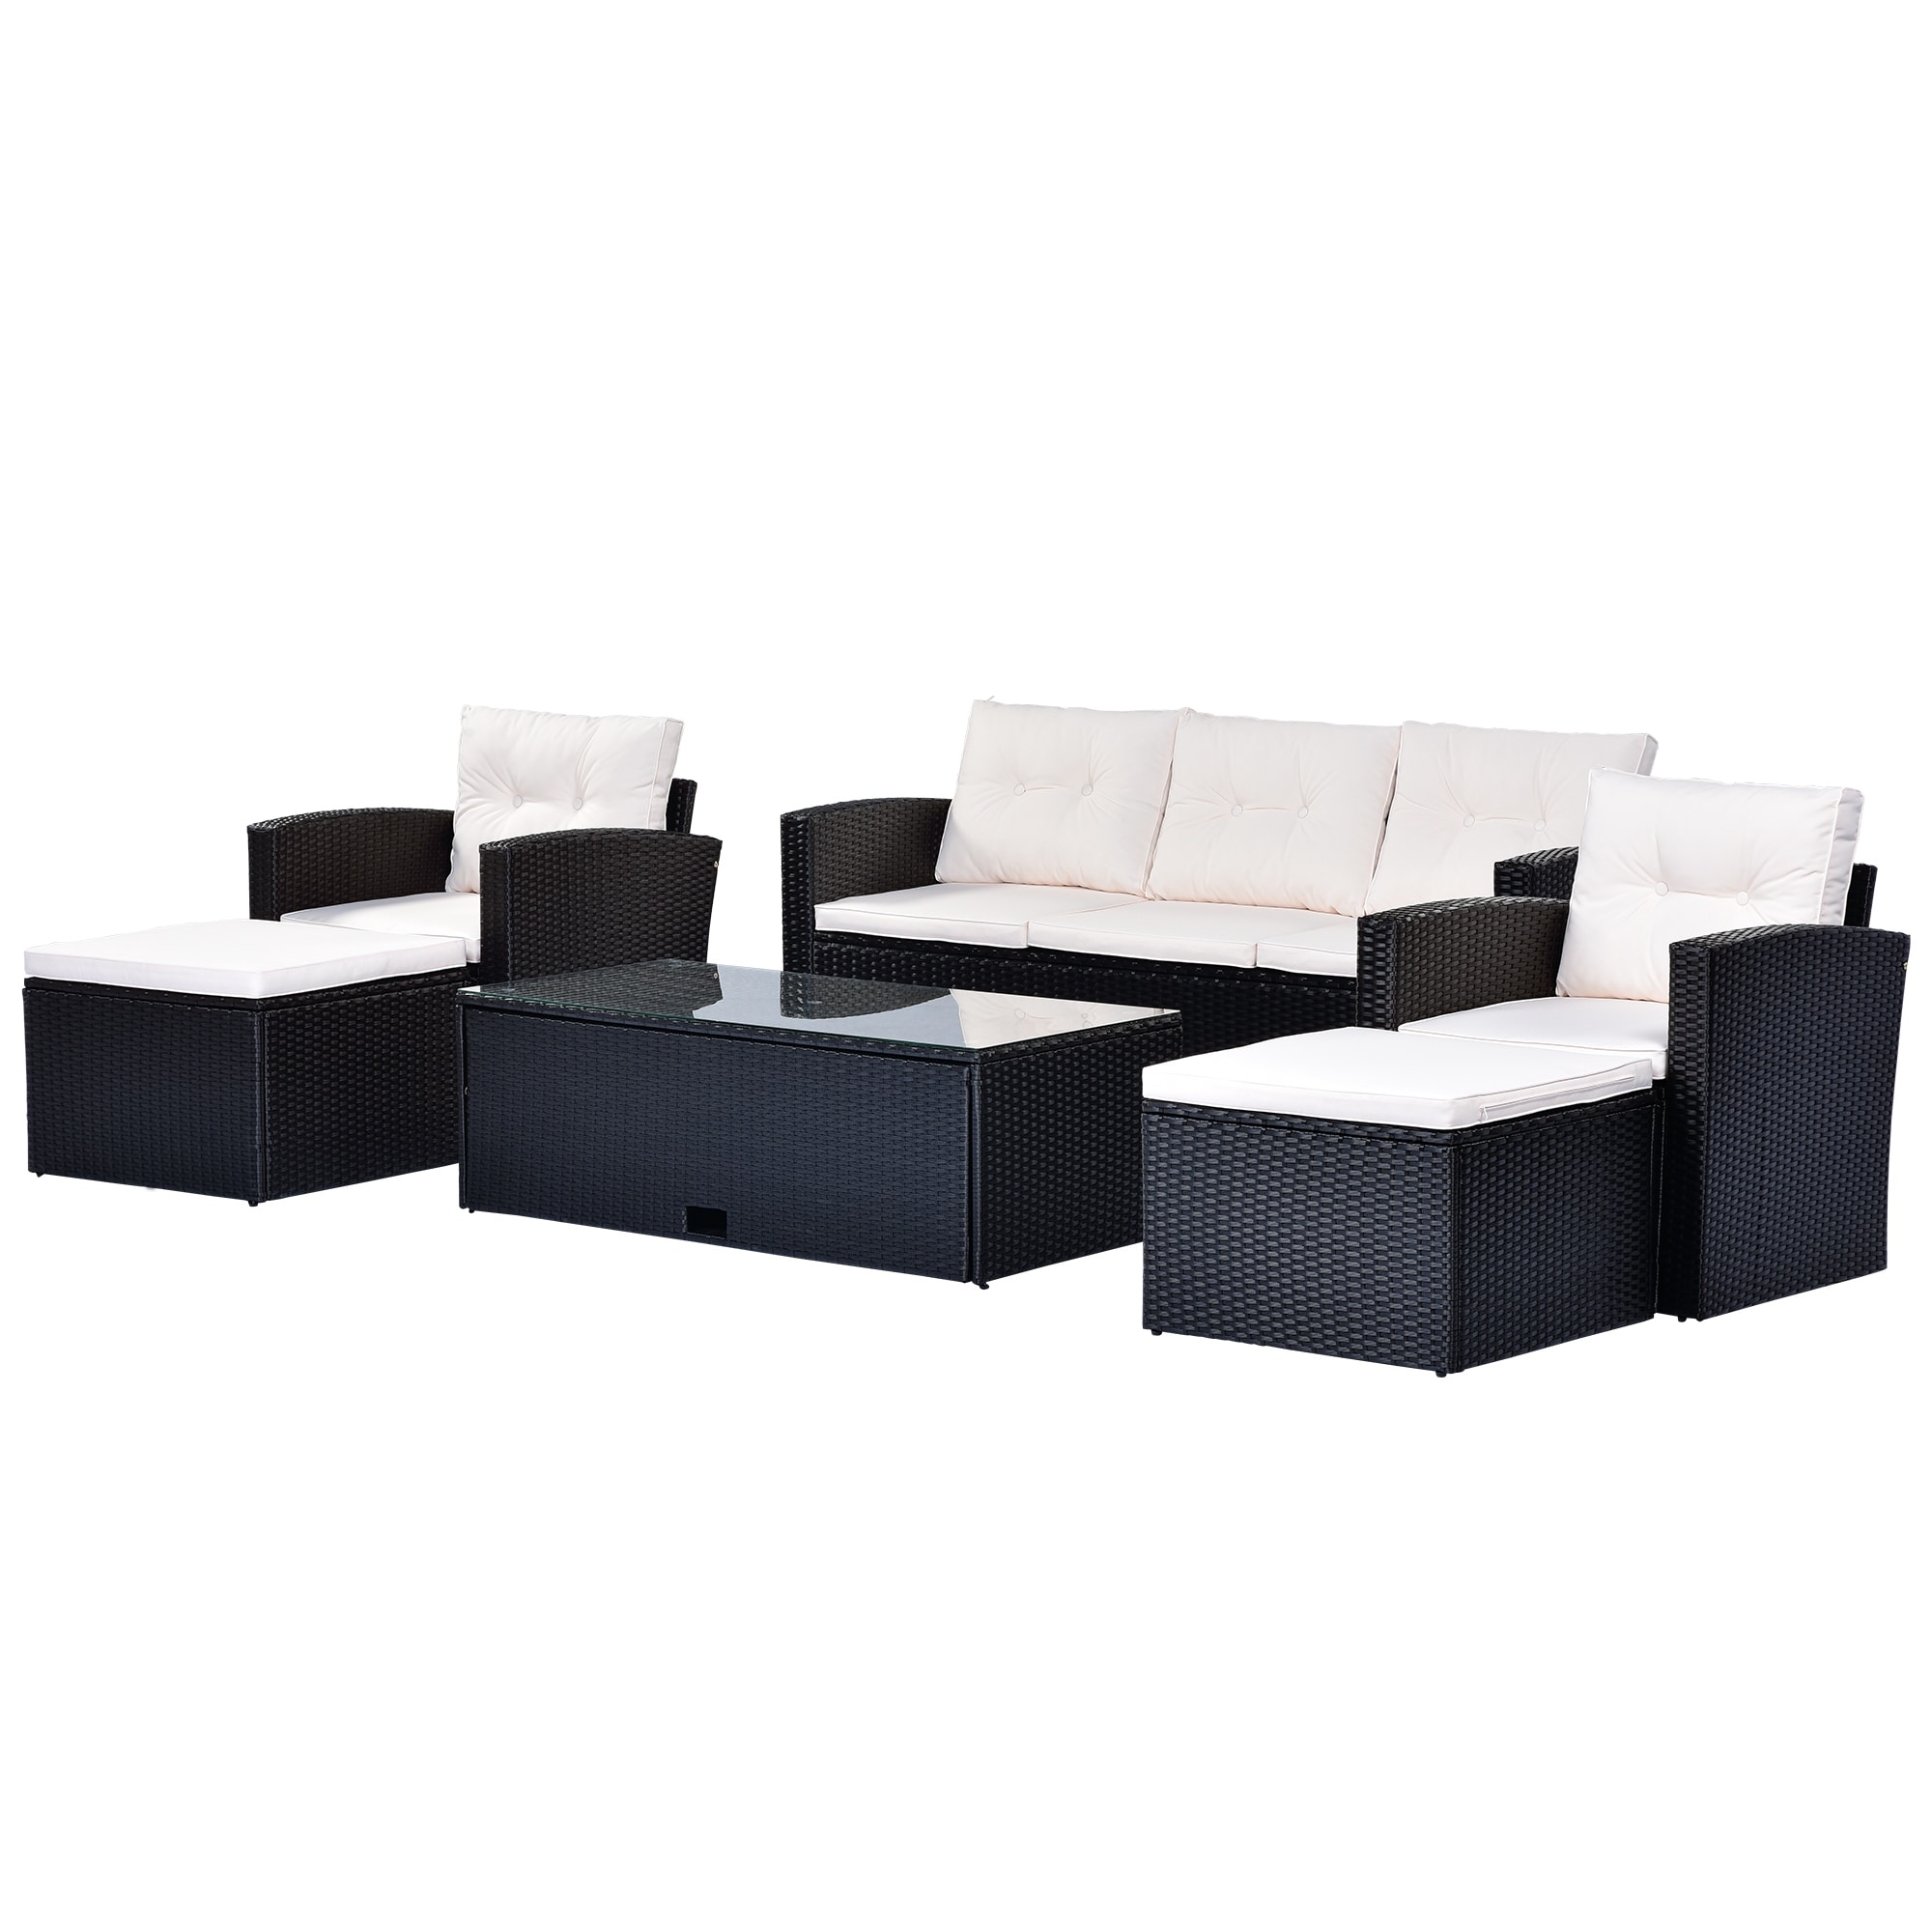 Go 6-piece All-weather Wicker Pe Rattan Patio Outdoor Dining Conversation Sectional Set